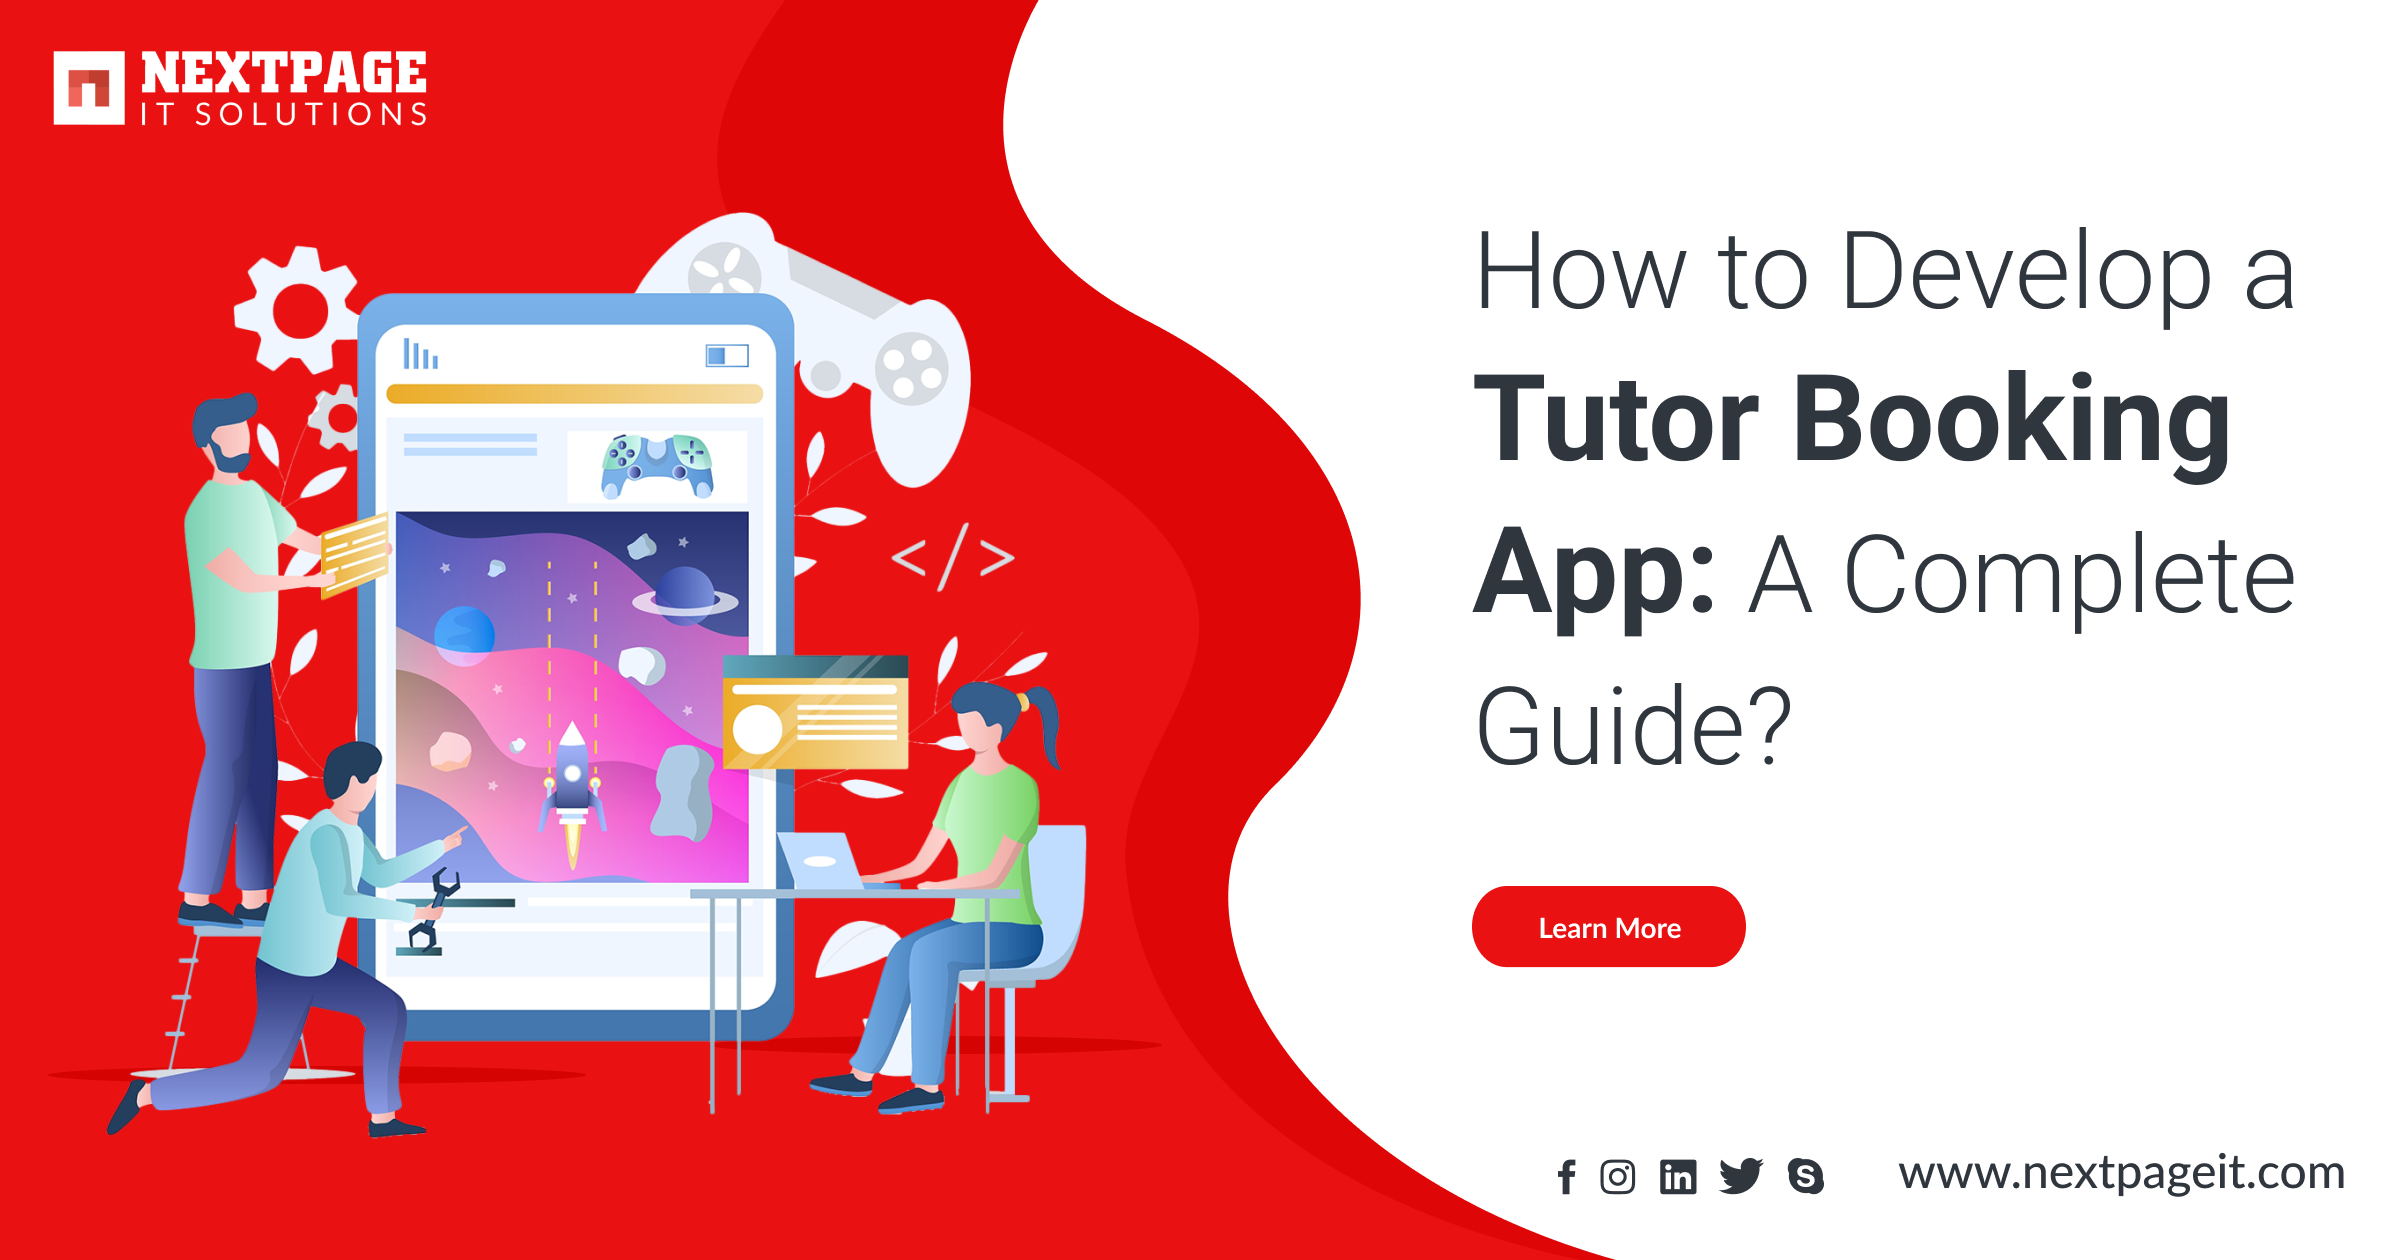 How to Develop a Tutor Booking App: A Complete Guide?